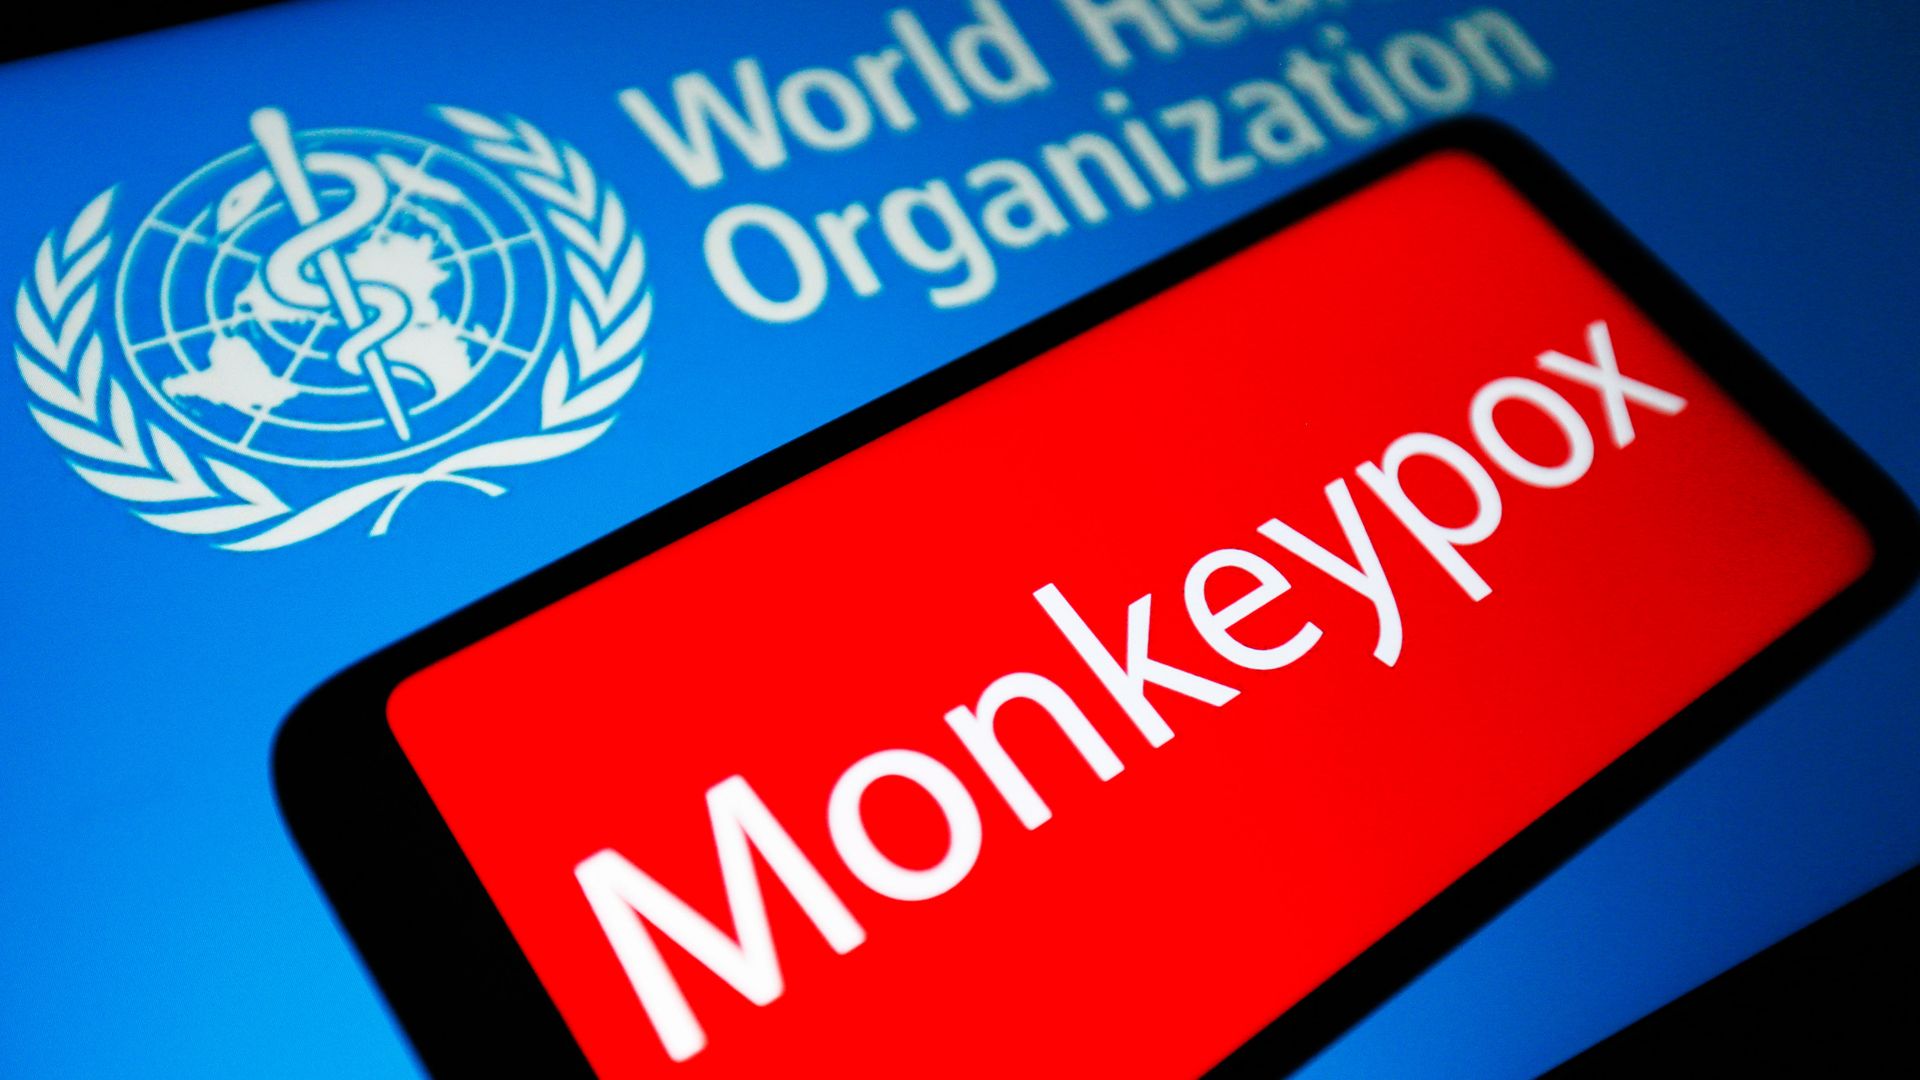 The word Monkeypox is seen on the screen of a smartphone.